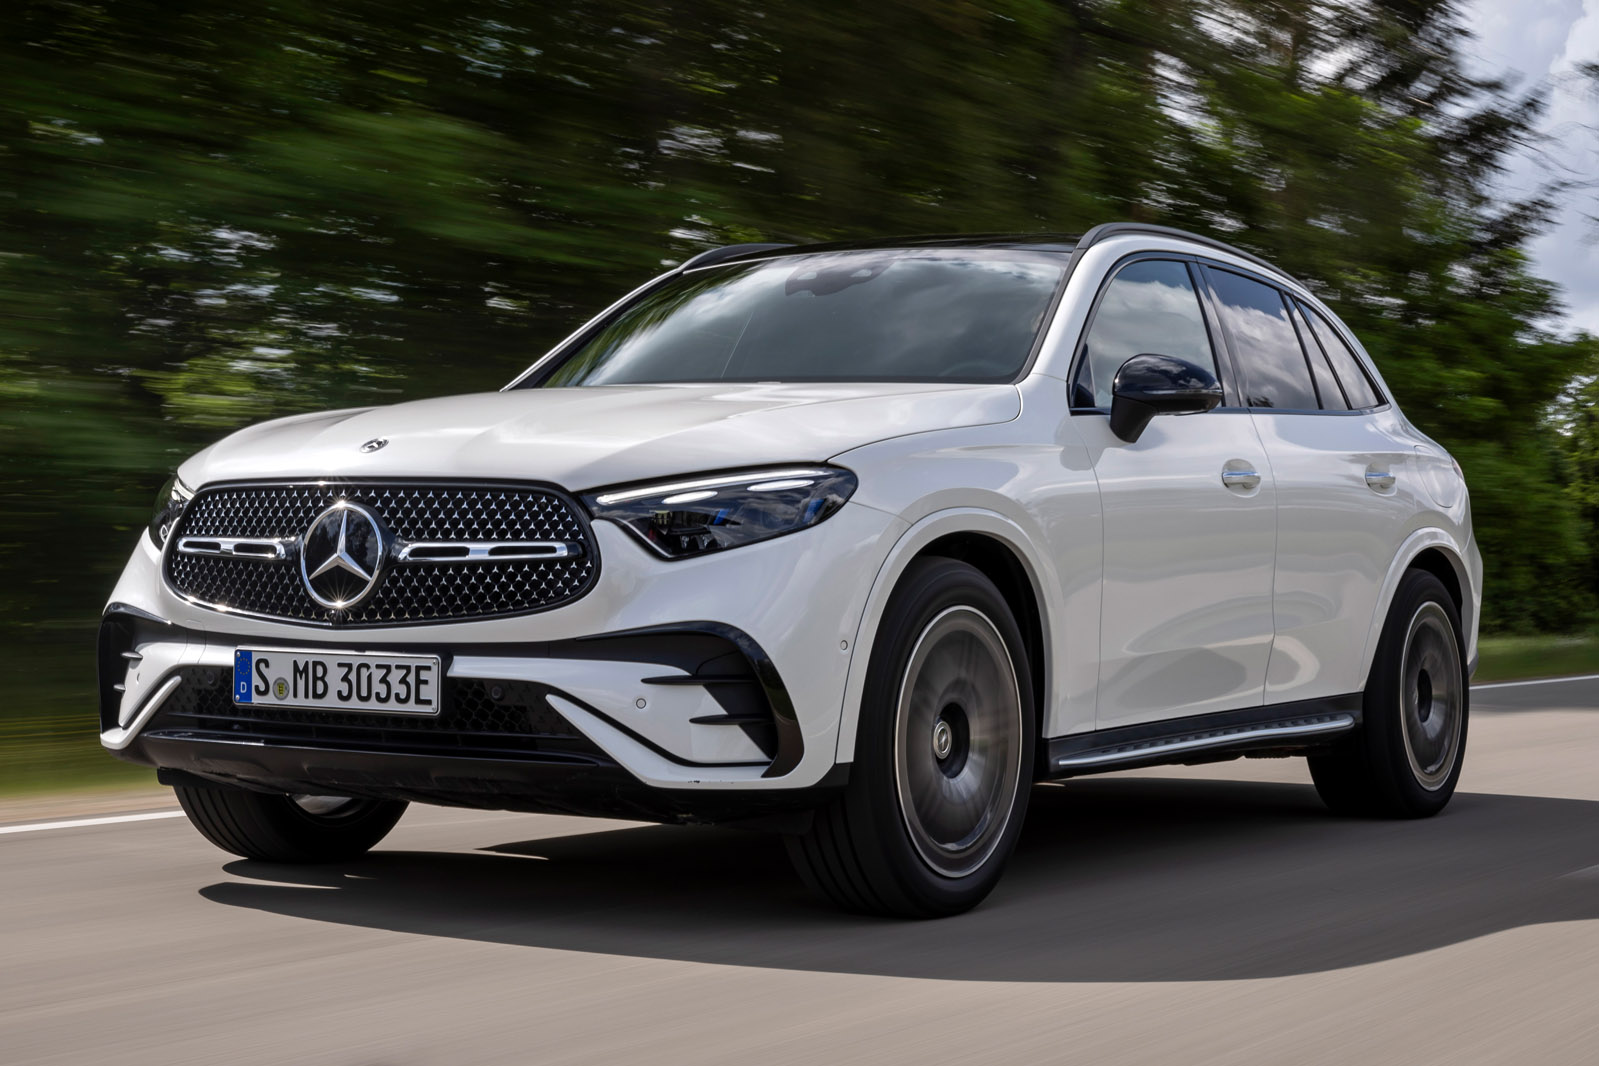 20 photos to decide if the X254 2023 Mercedes-Benz GLC is worth waiting for